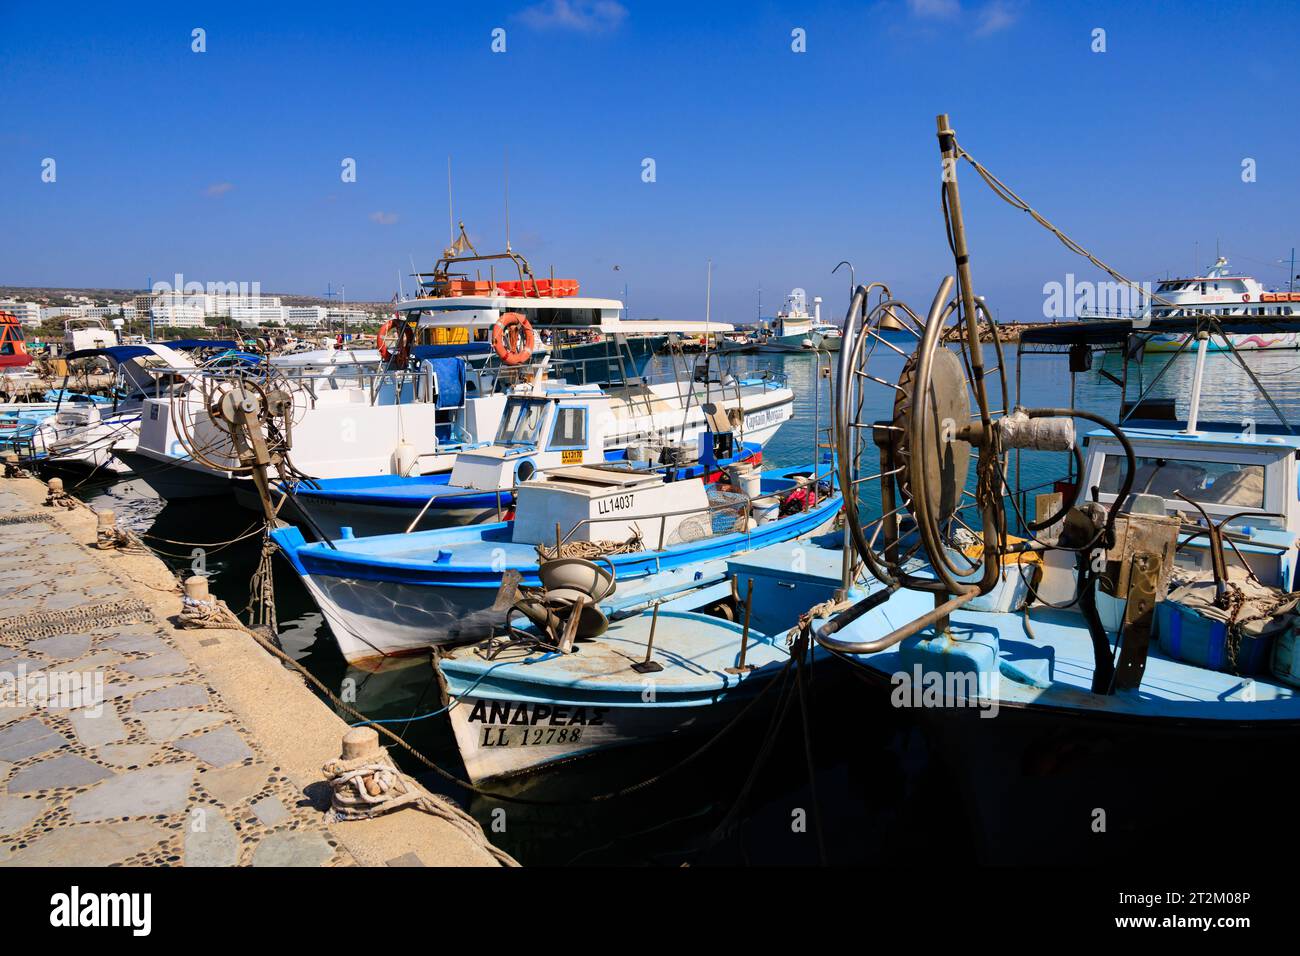 Traditional Cypriot fishing boats moored in Ayia Napa Harbour. Cyprus Stock Photo